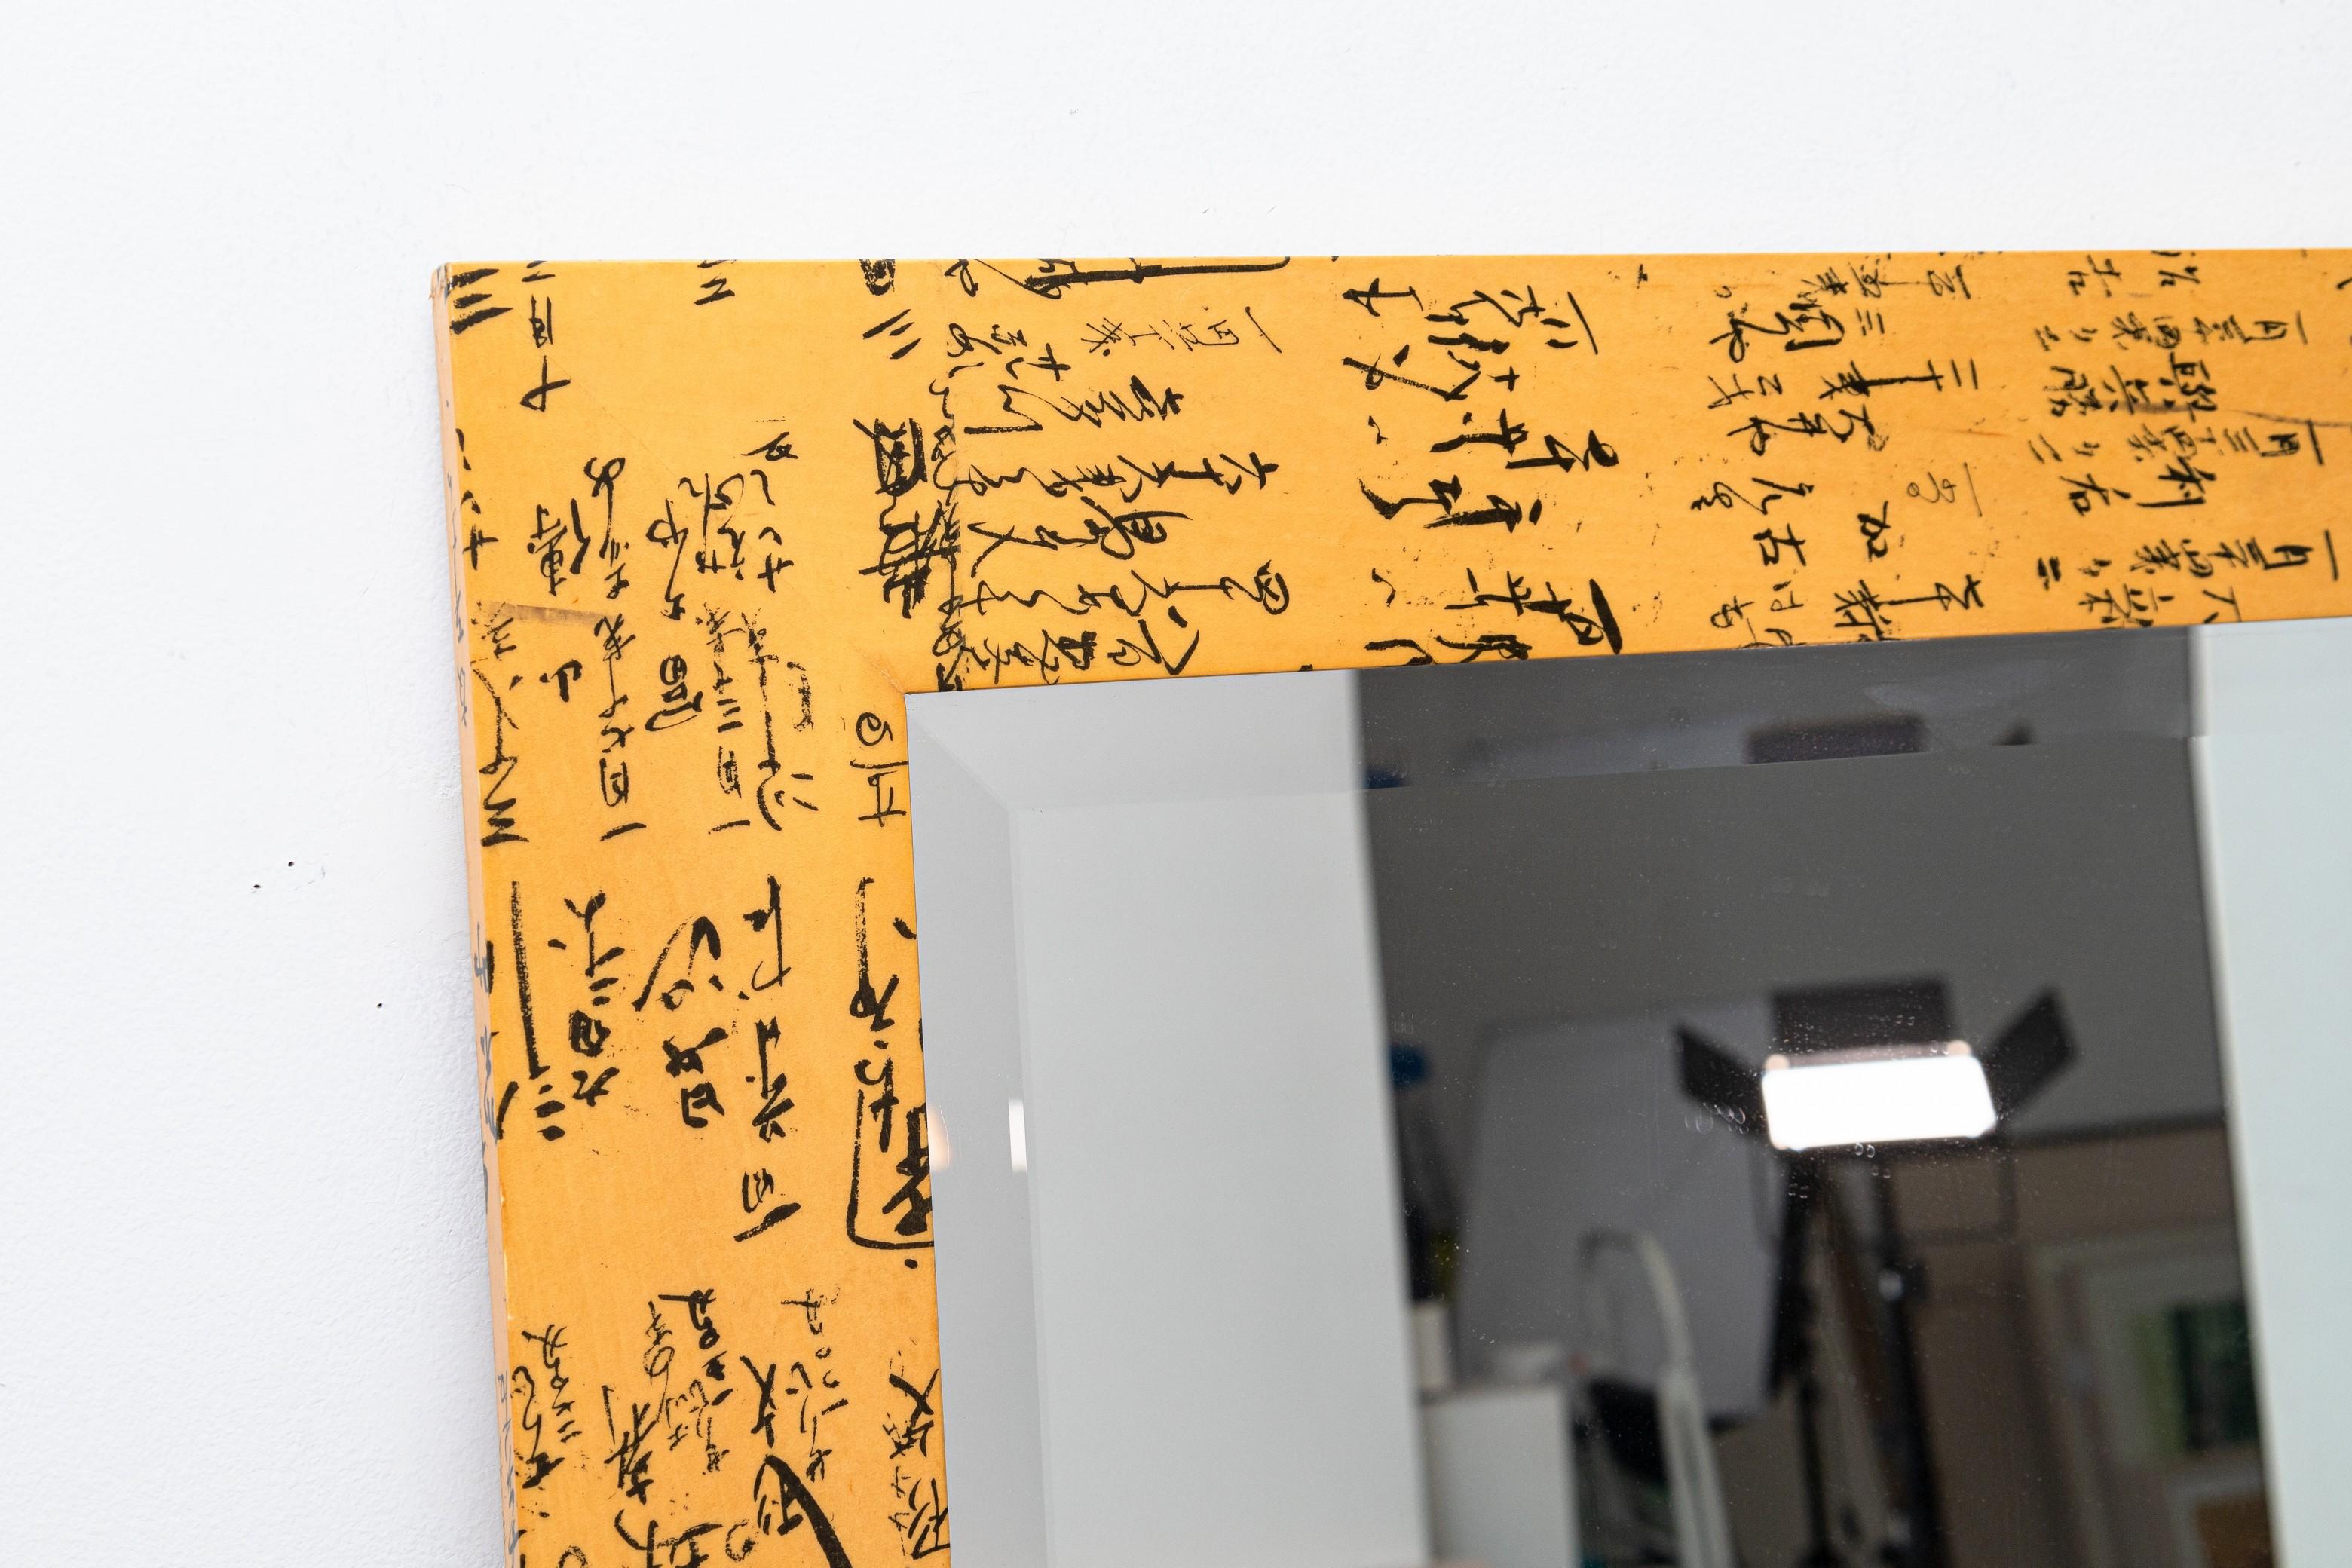 A Century Furniture Washi Script mirror. This lovely large mirror features an Asian script design stretching across the frame of the mirror. The black text sits on a tan/yellow/orange colored frame. The mirror itself is a crystal clear rectangular